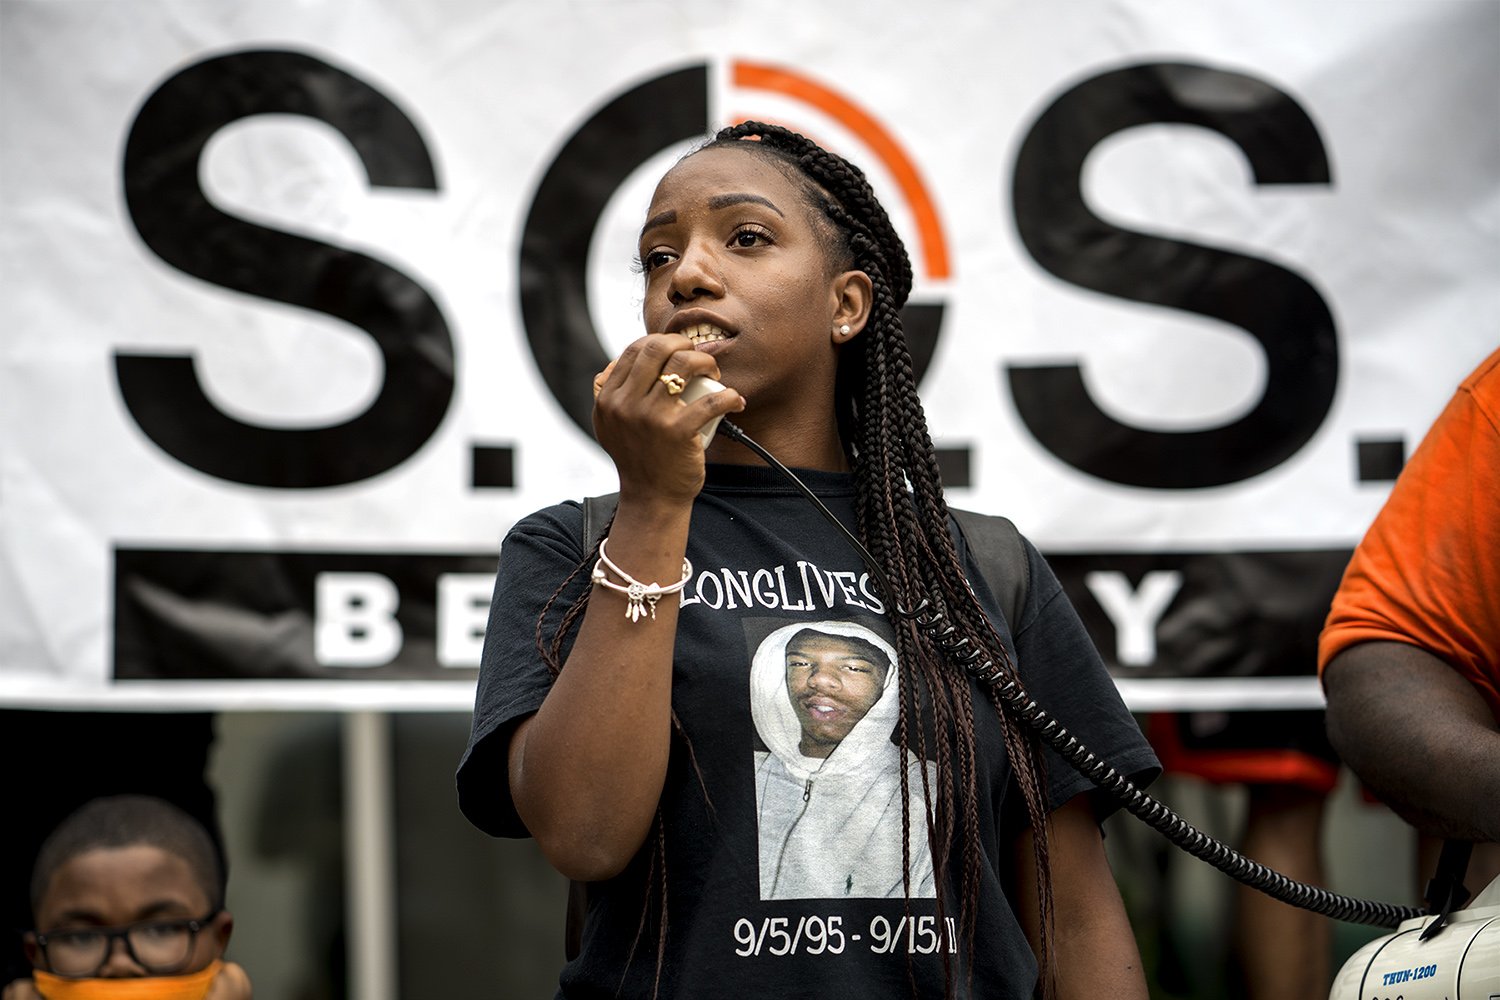 Nathalie Arzu speaks at the rally in the memory of her brother, Jose Webster, who was fatally shot by a gang in 2011. (Photo by Tsubasa Berg)